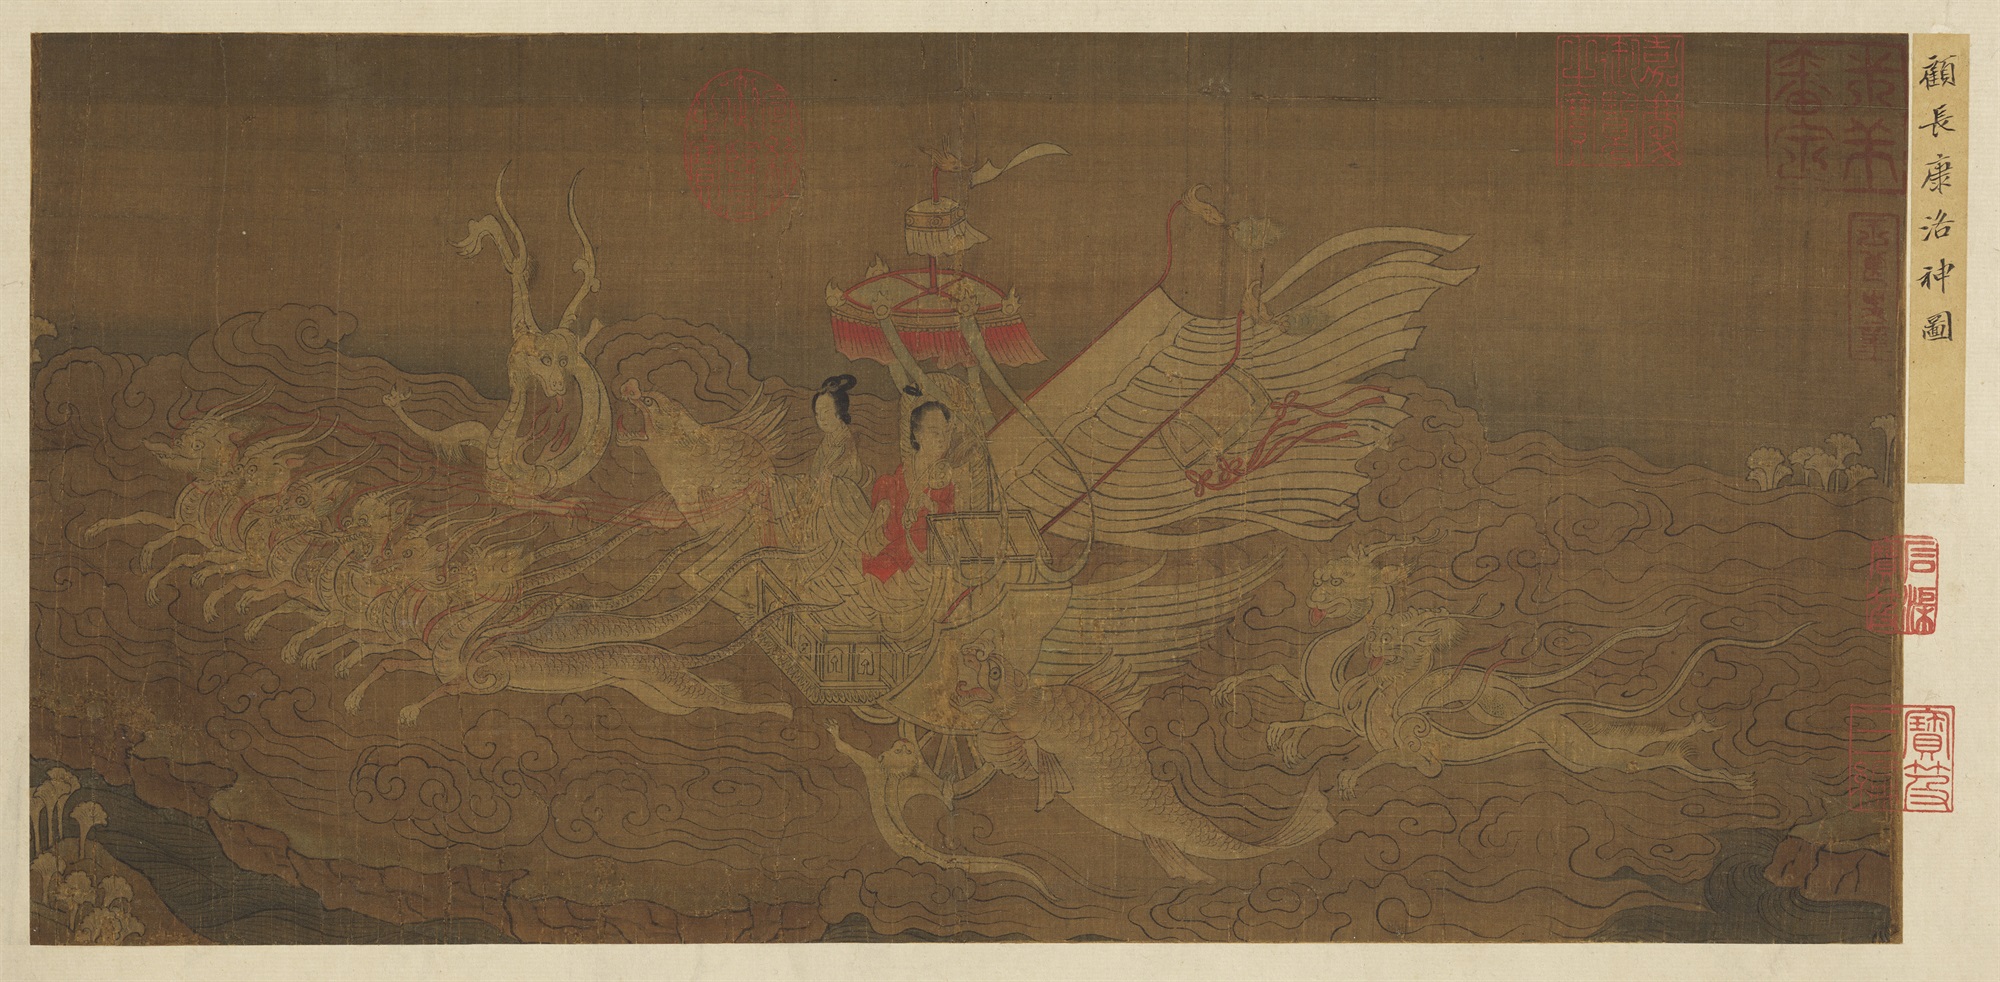 Goddess of the Luo River Attributed to Gu Kaizhi (ca. 345-406), Jin dynastypreview